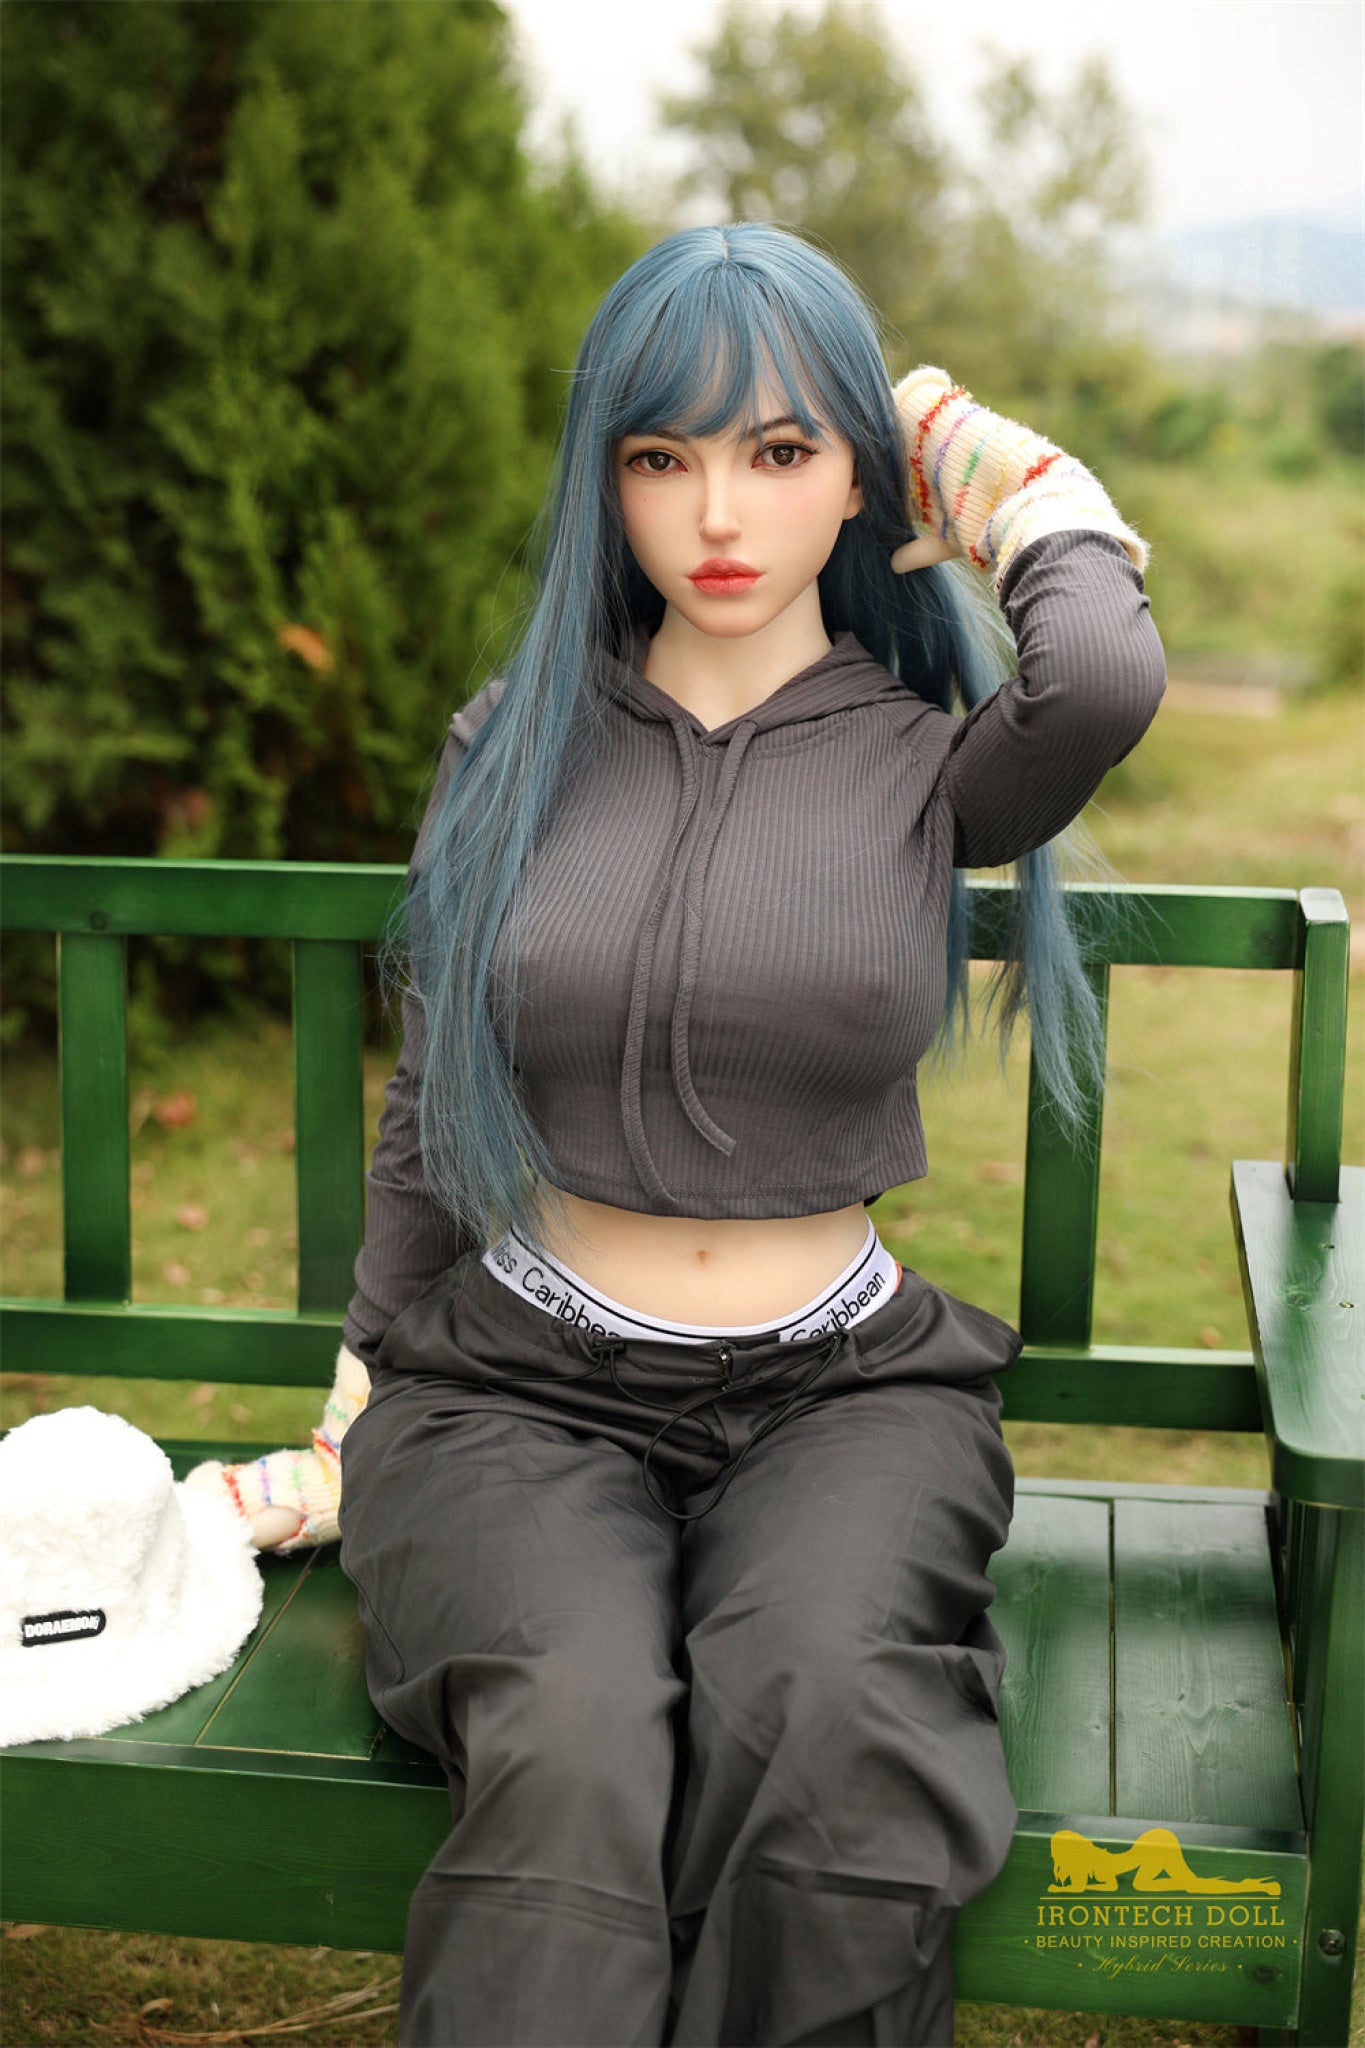 Joline Silicone Head and TPE Body Hybrid Sex Doll - Irontech Doll Irontech Doll